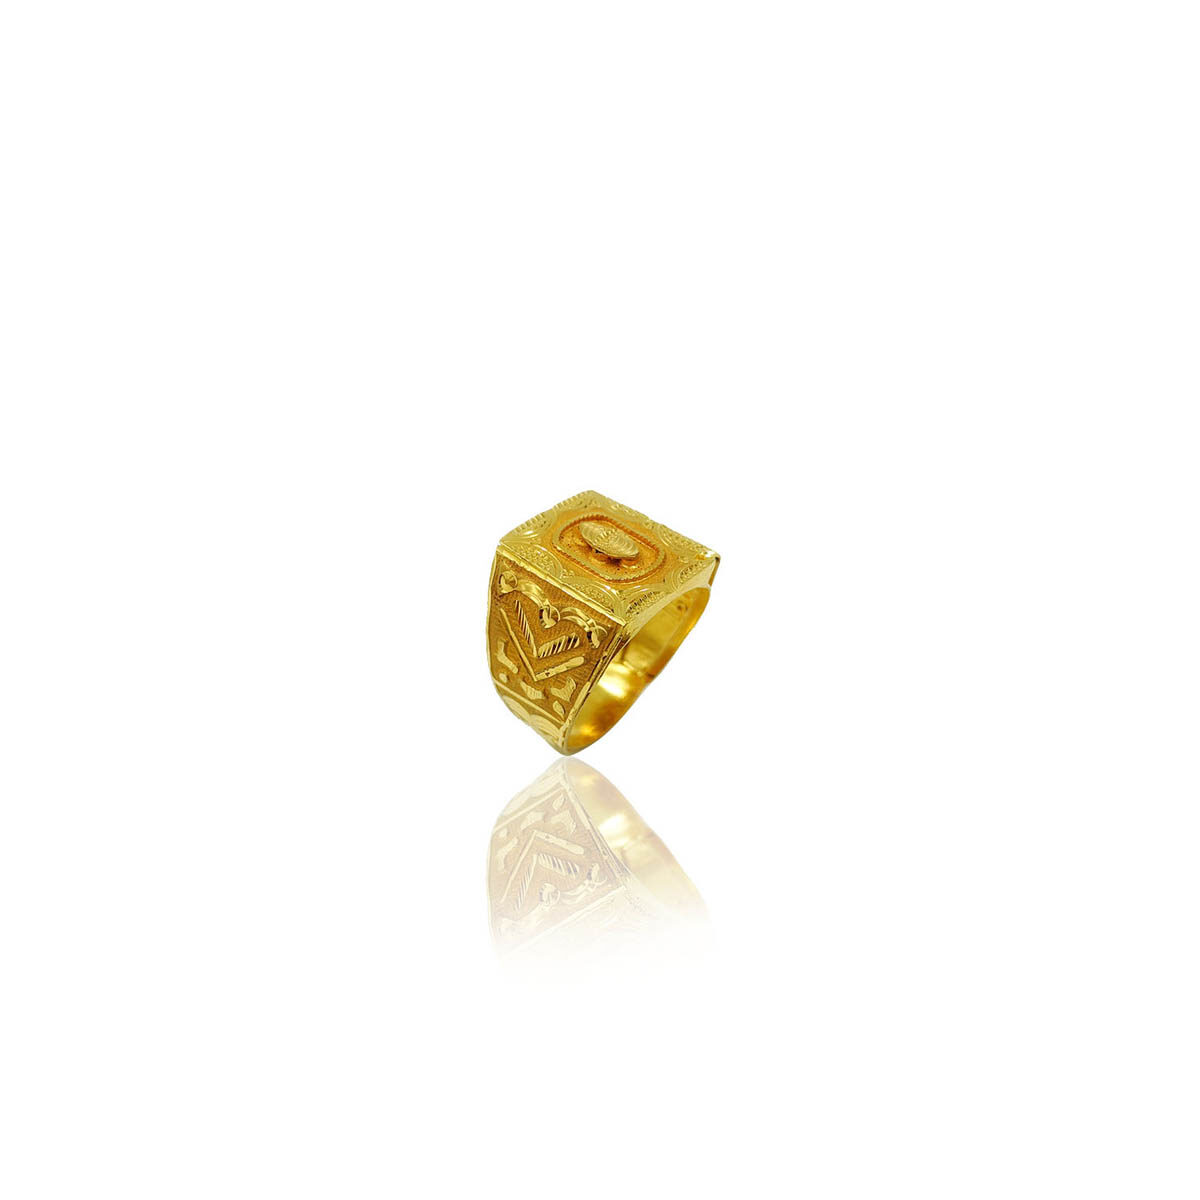 18K Gold Plated Adjustable Ring 